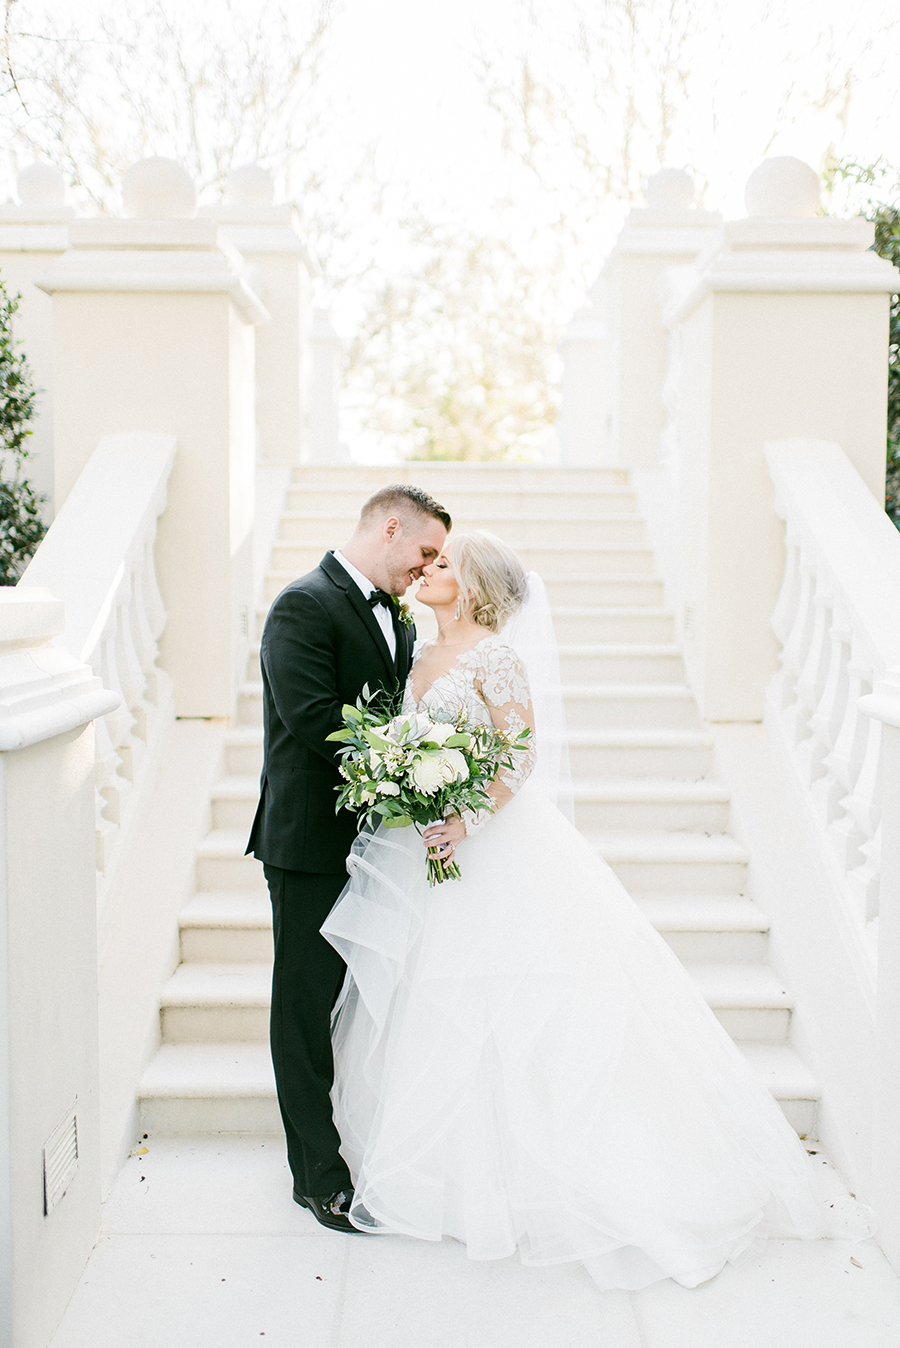 Couple in front of stairs